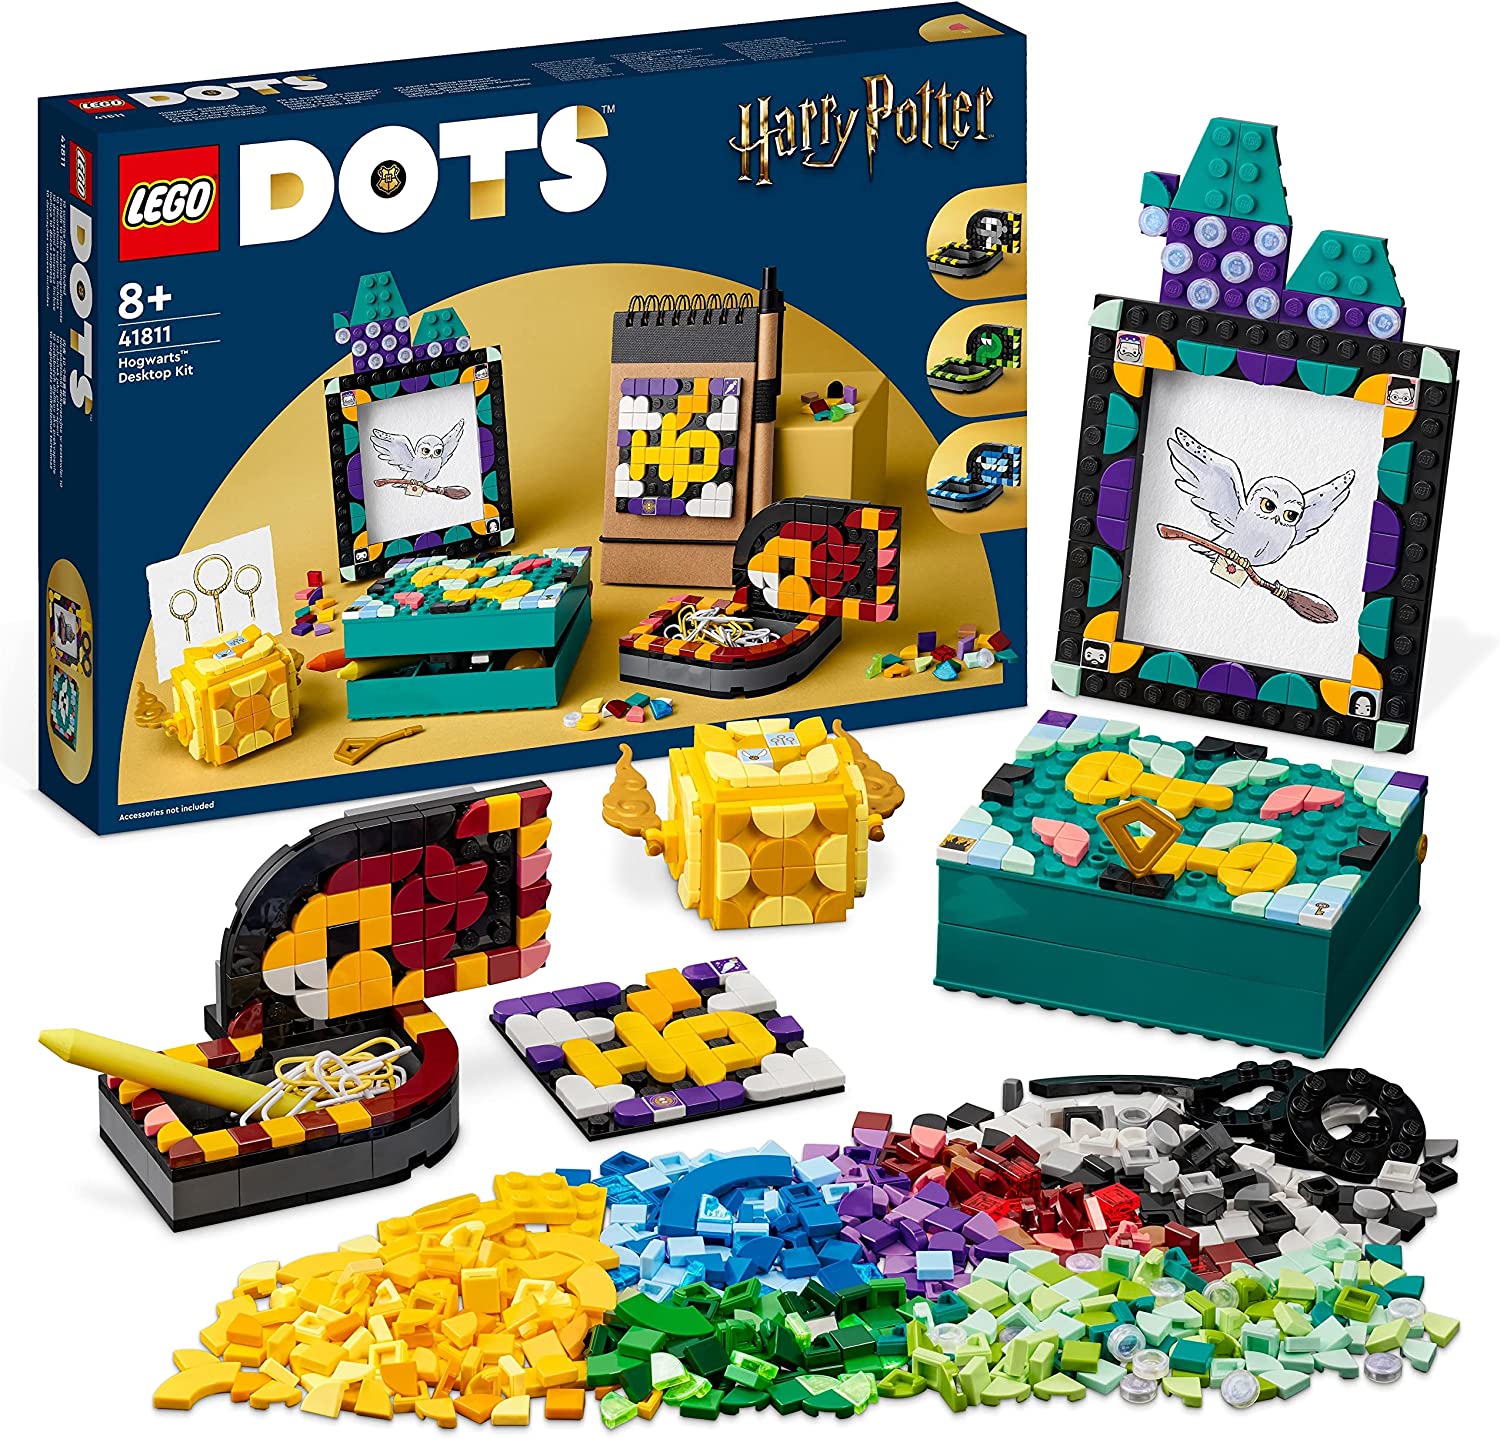 LEGO 41811 Dots Hogwarts Desk Set, DIY Harry Potter Accessories for School, Craft Kit Decoration and Patch, Craft Mosiac Toy Set for Kids